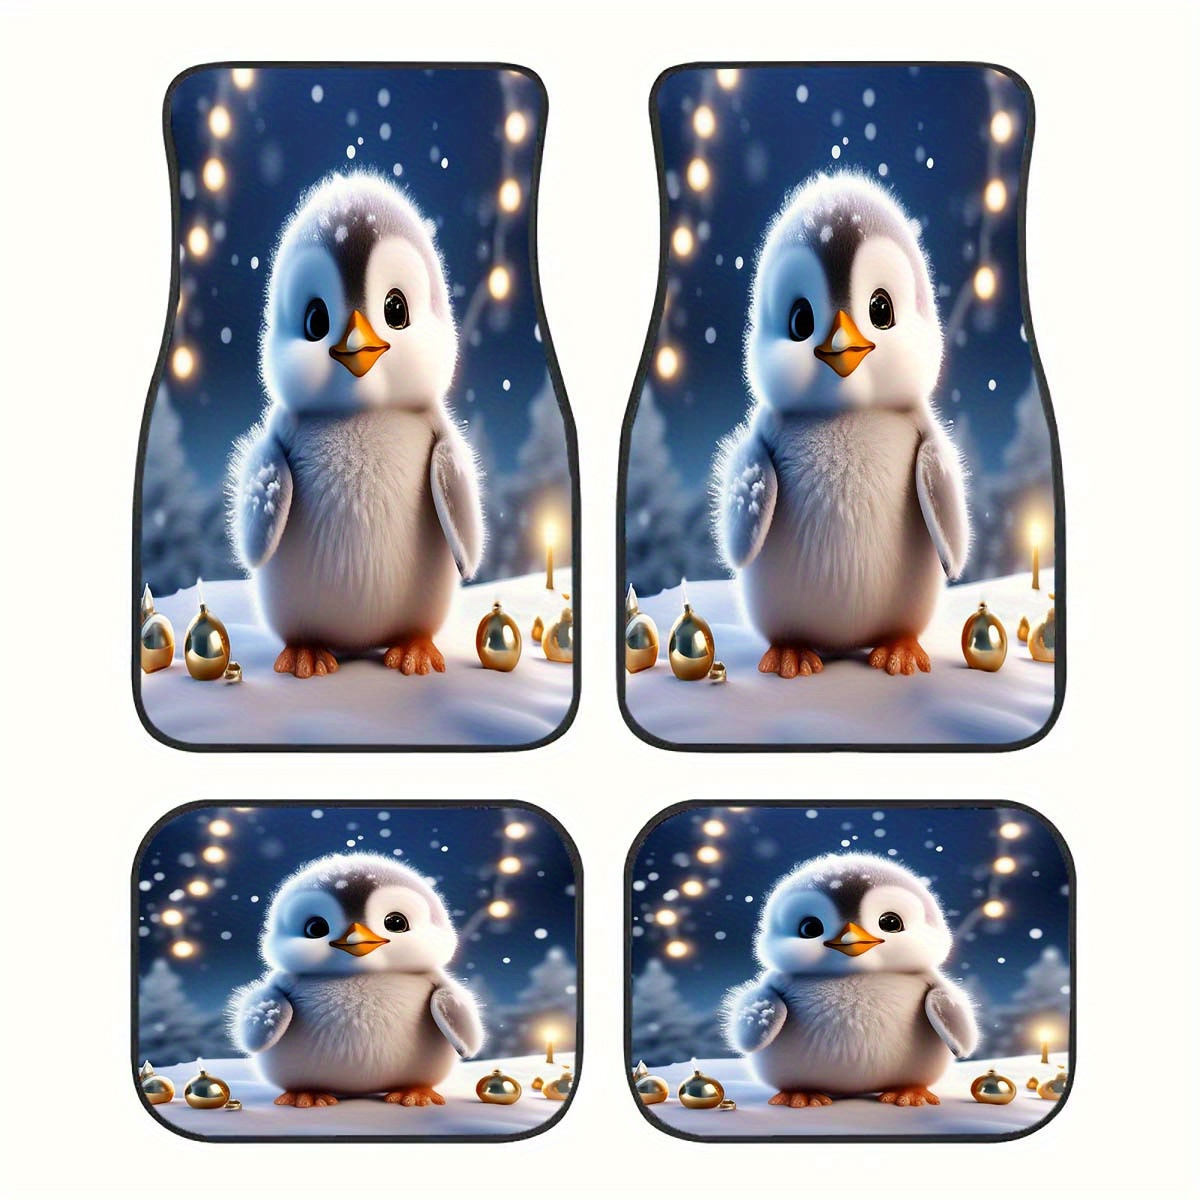 

Cute Little Penguin Decorative Car Floor Mats For Front And Rear Seats - Festive Winter Design, Durable Polyester Material